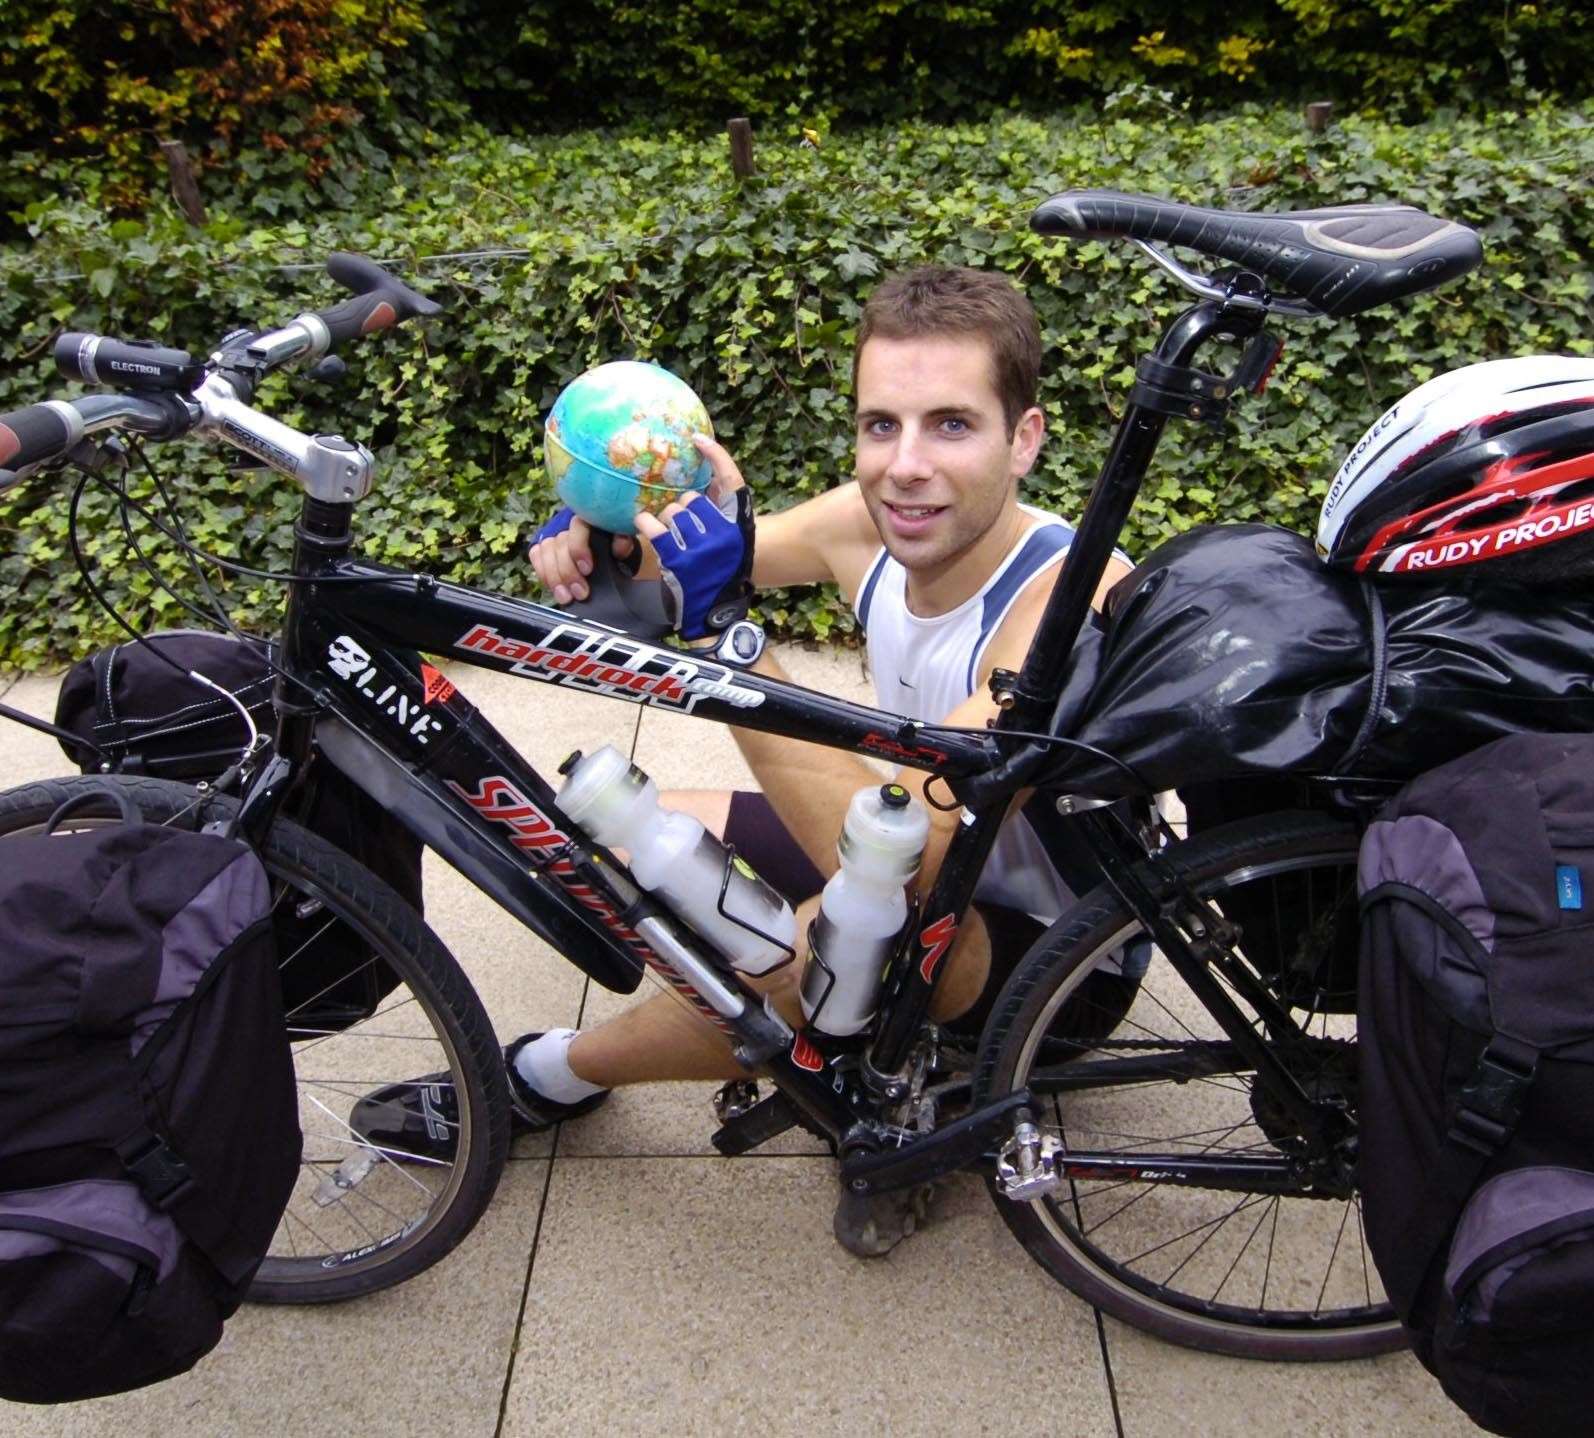 Flashback to Mark's build-up to his first round-the-world cycle challenge which he completed in 2008.